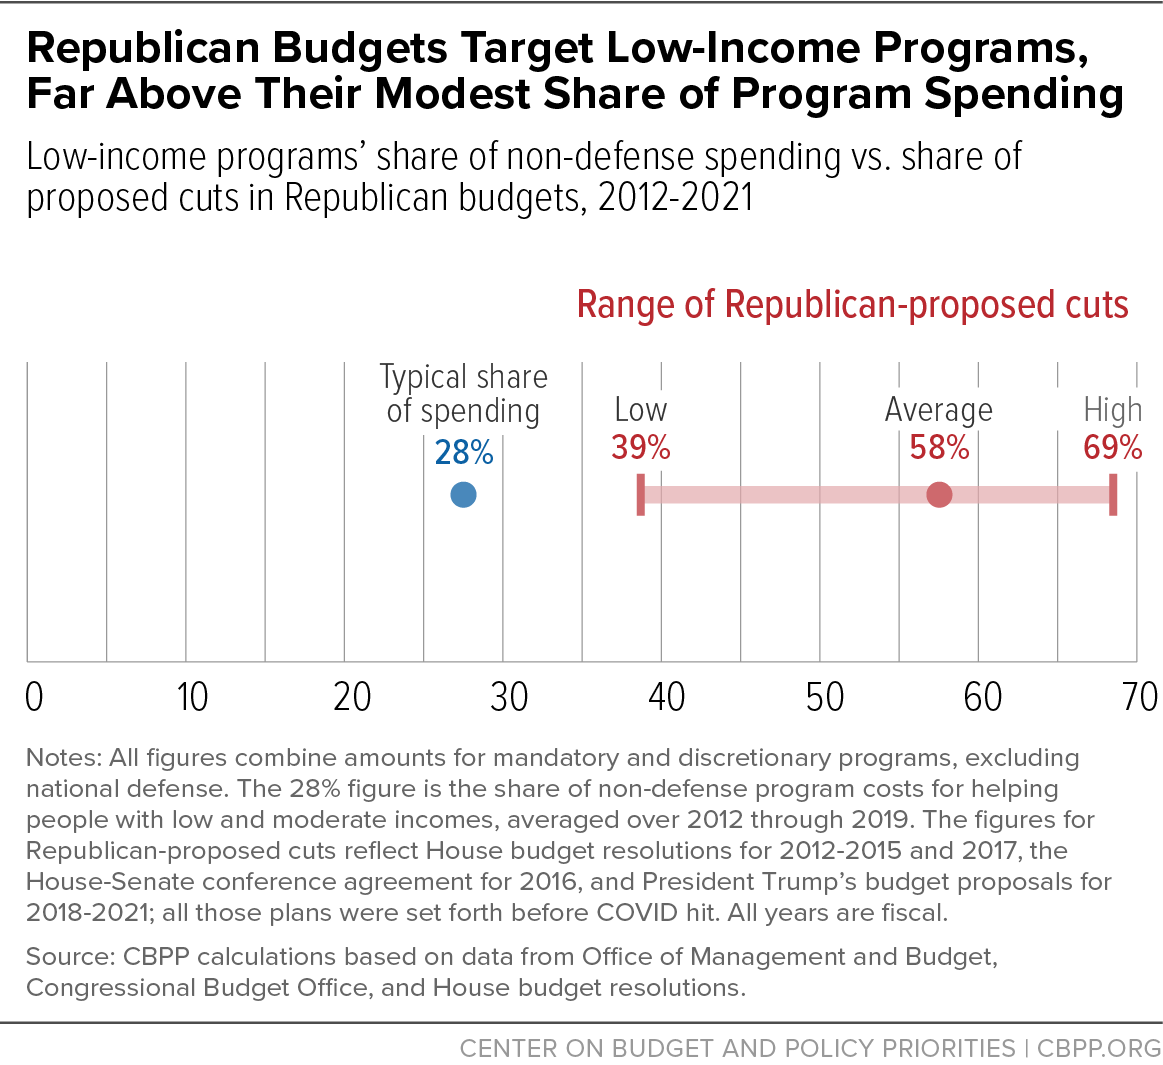 Republican Budgets Target Low-Income Programs, Far Above Their Modest Share of Program Spending